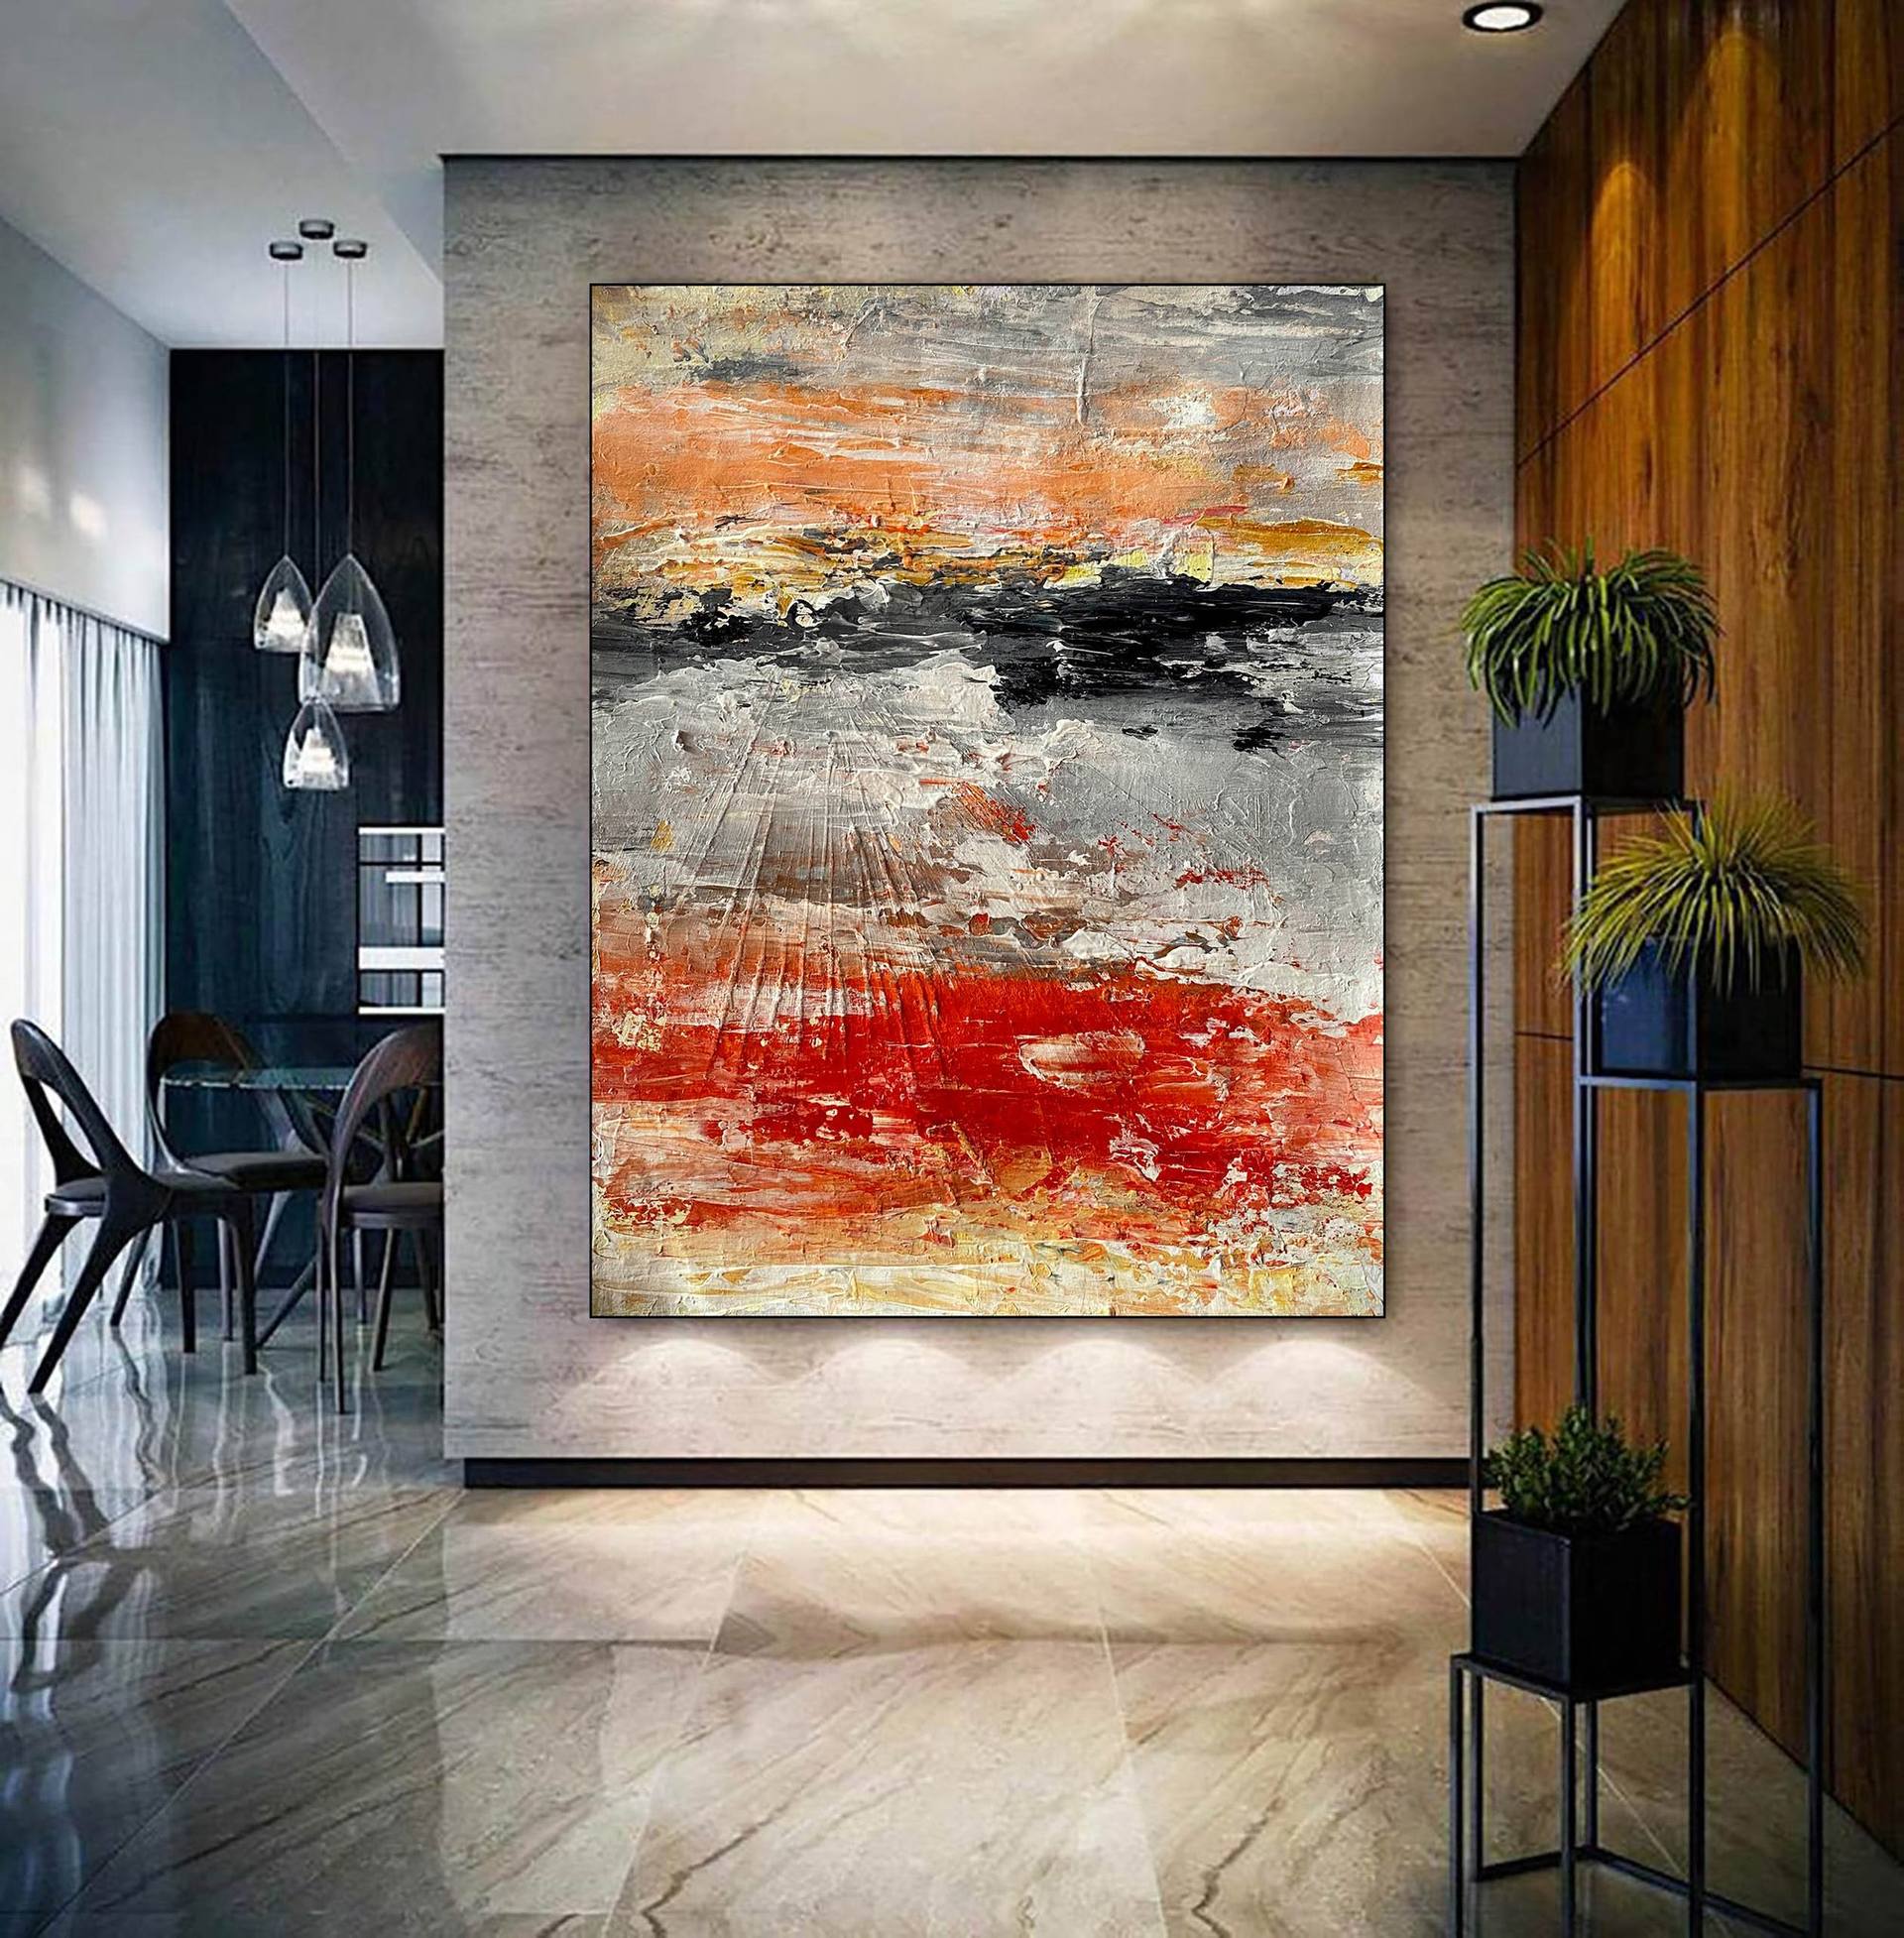 Textured Abstract Wall Art Extra Large Artwork Oversize Vertical Modern Texture Oil Painting on Canvas White Gray Red